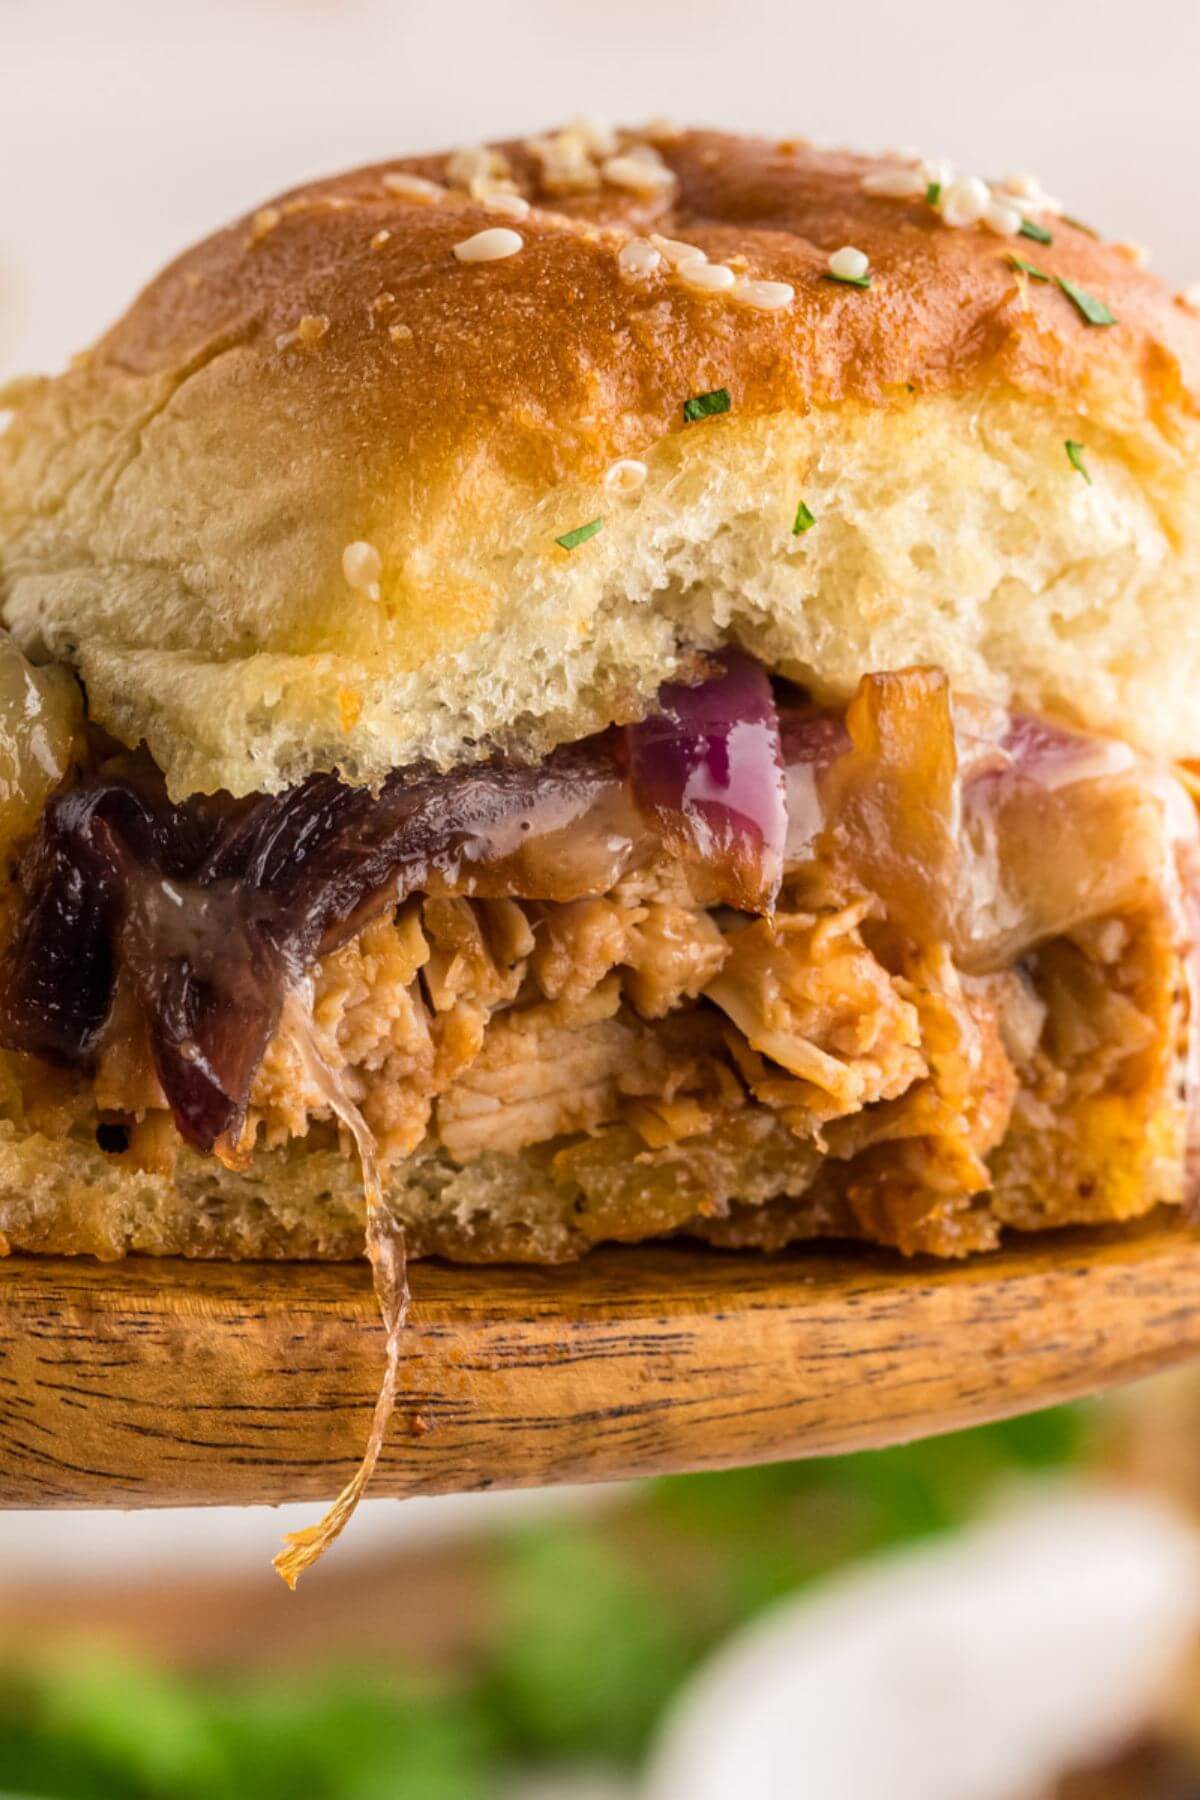 BBQ Chicken Slider lifted up on wooden spoon showing filling.